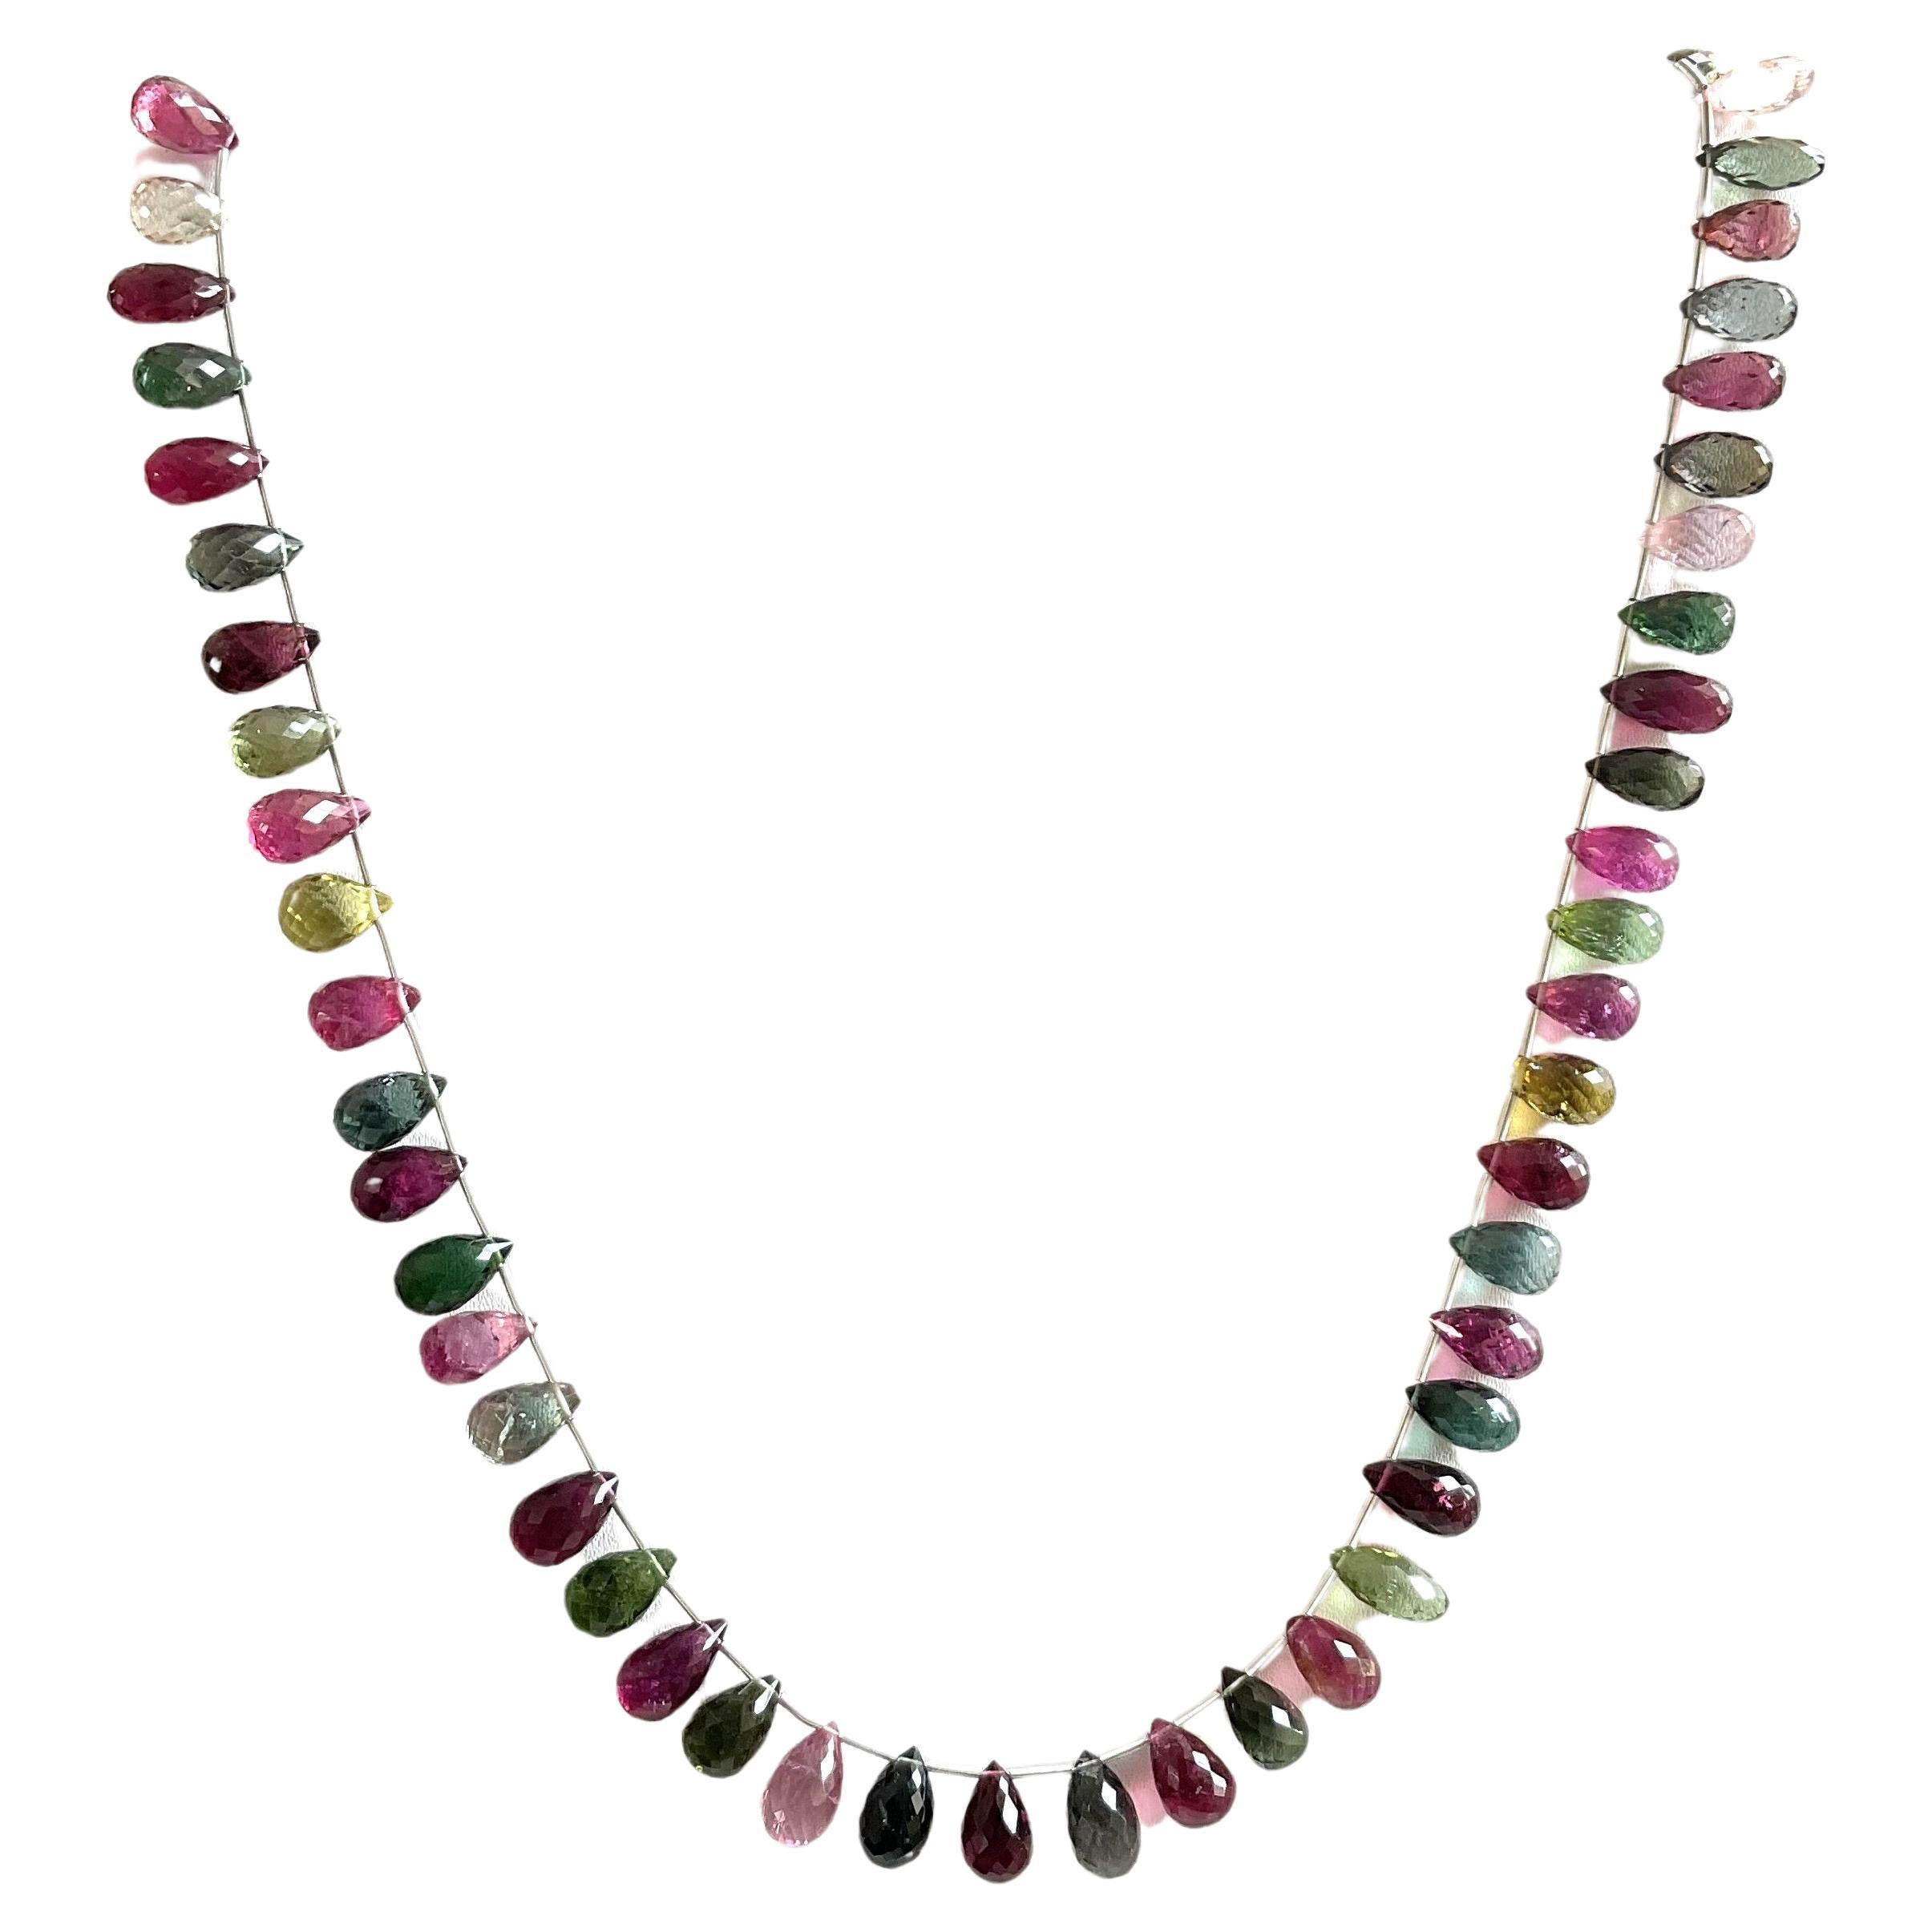 Multi Color 178.85 Carats Tourmaline Top Quality Natural Faceted Drops Necklace